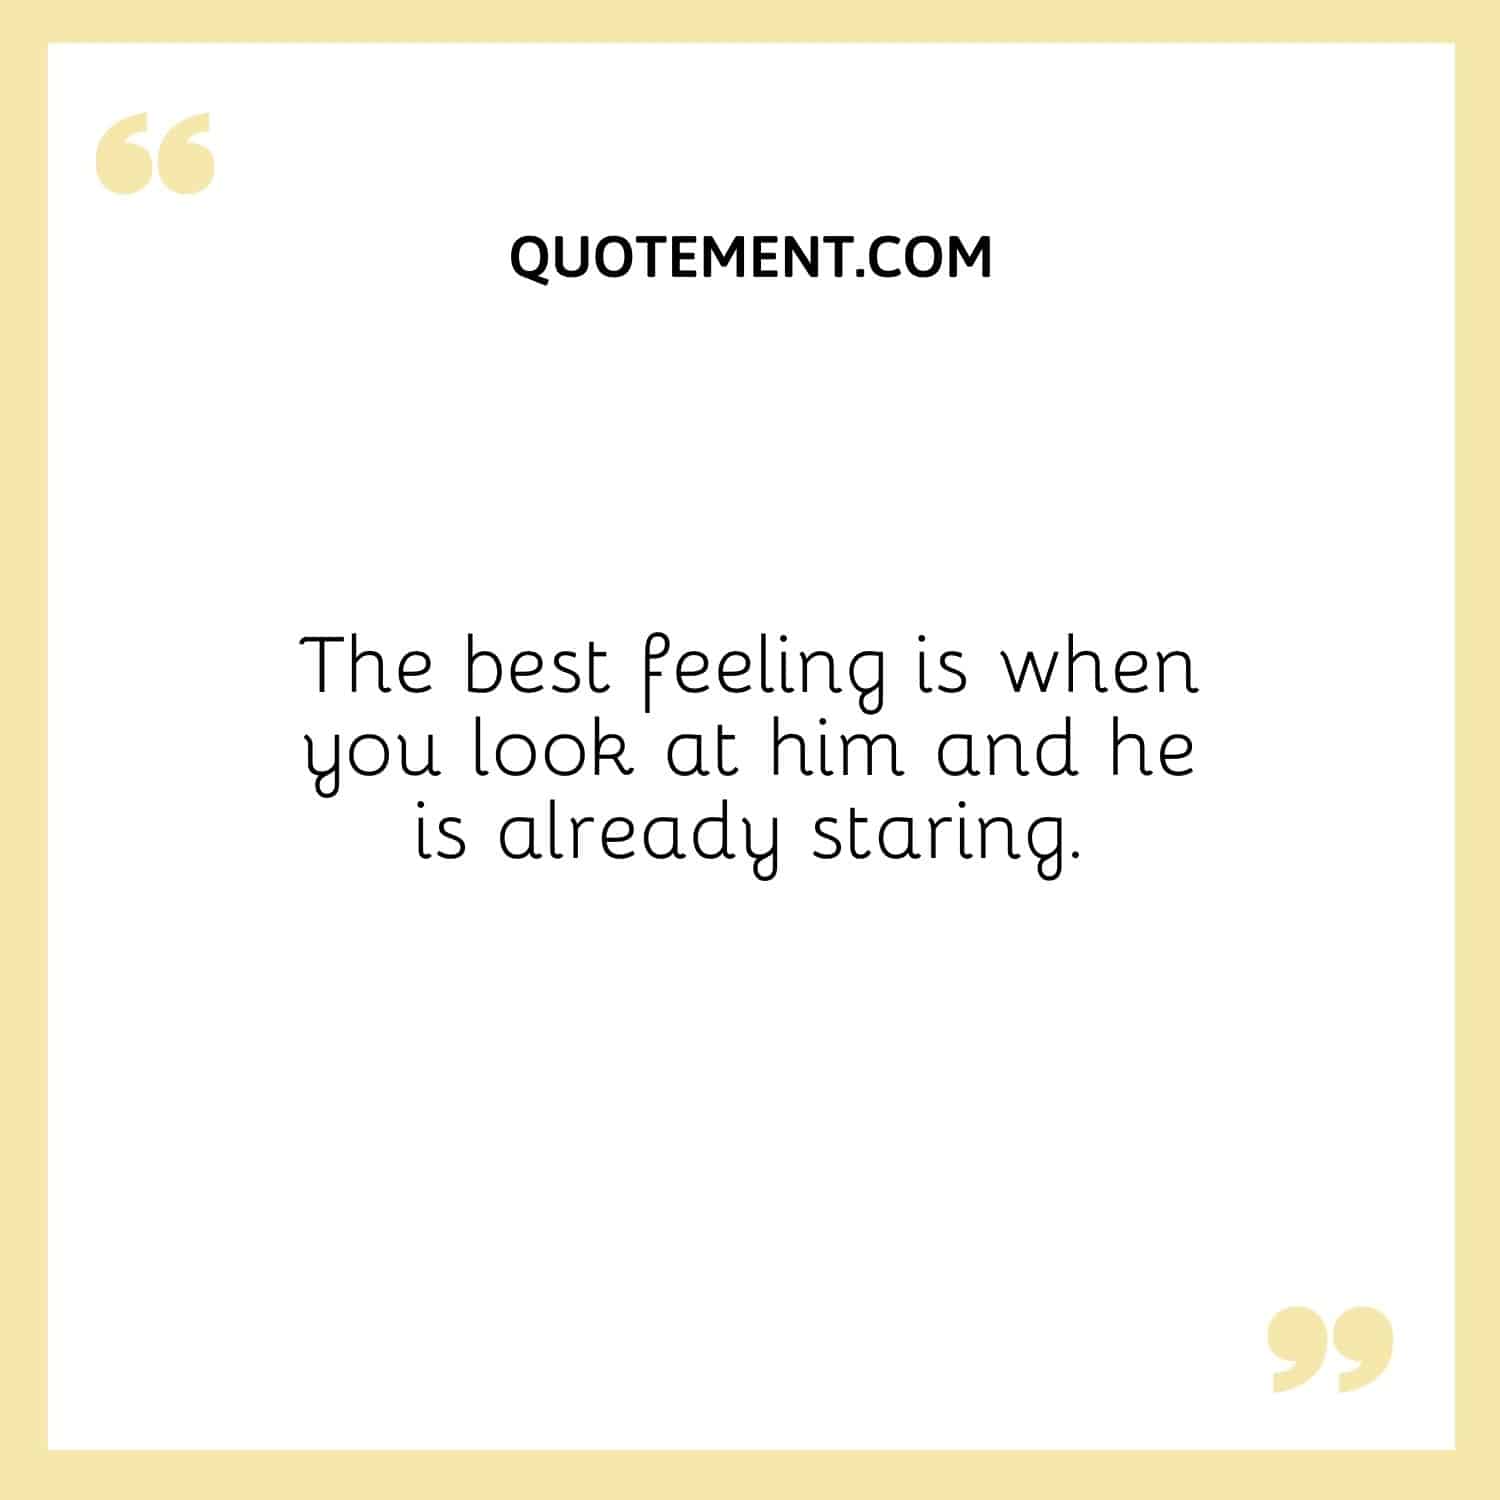 The best feeling is when you look at him and he is already staring